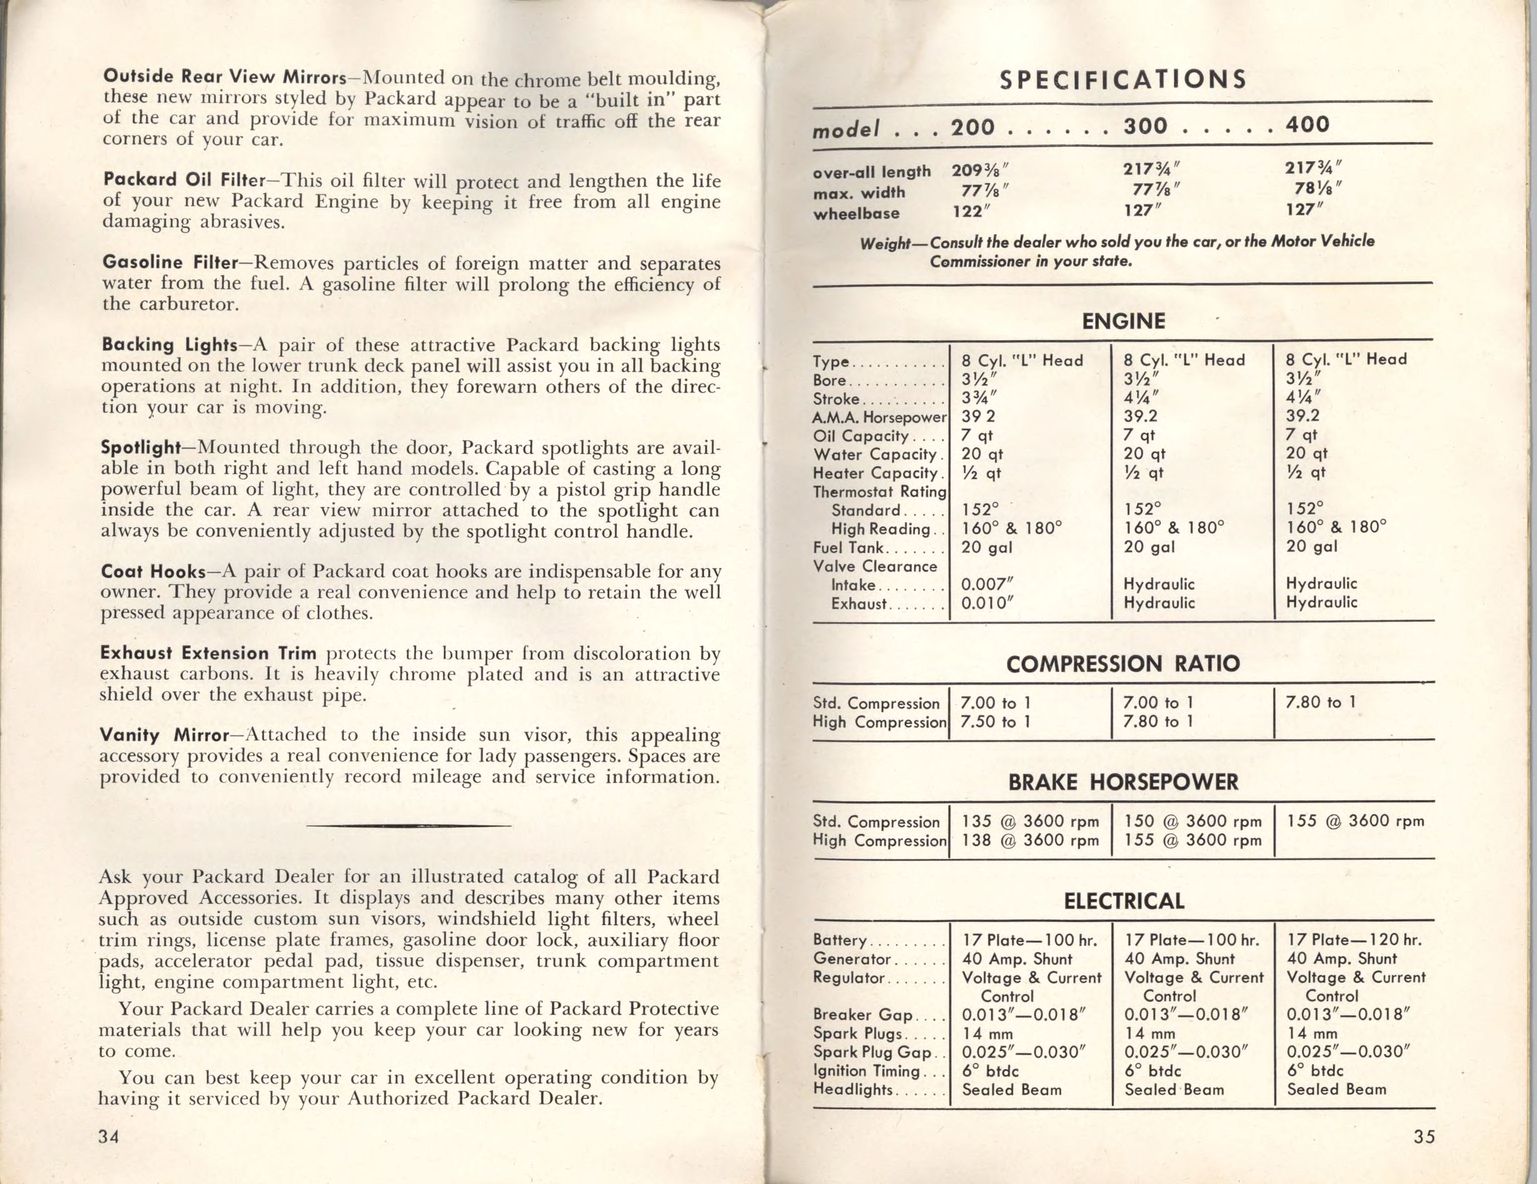 1951 Packard Owners Manual Page 8